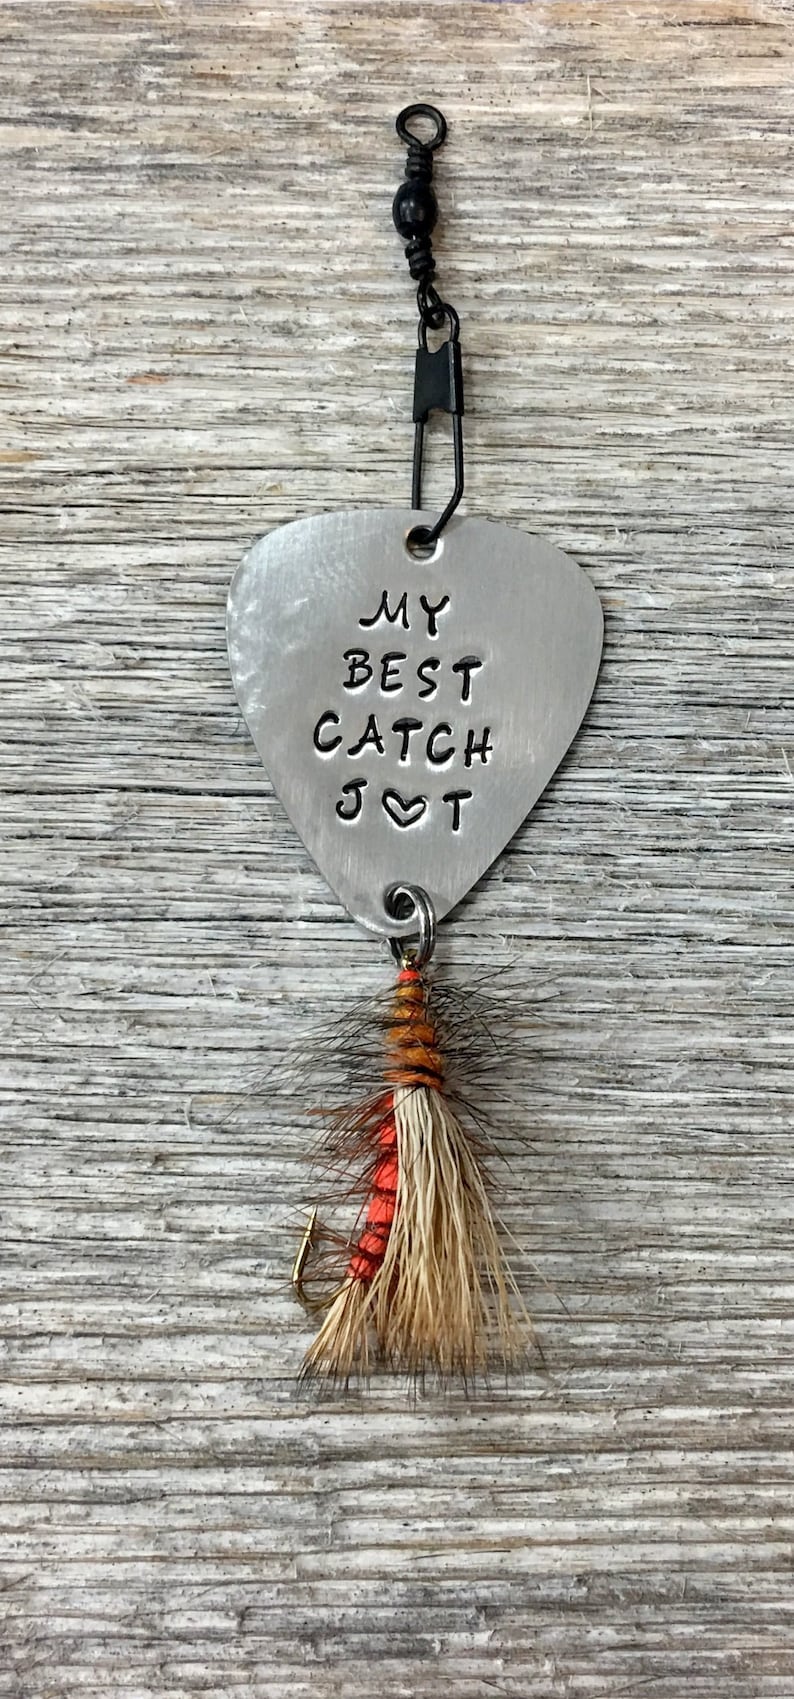 Have no idea of what to get your boyfriend who is really into fishing? The struggle is over because this personalized fishing lure is here for you. Make it unique by engraving your personal text along with Her and His name initials. It’s a small gift for your boyfriend as well as a reminder of your love every time he goes fishing. 